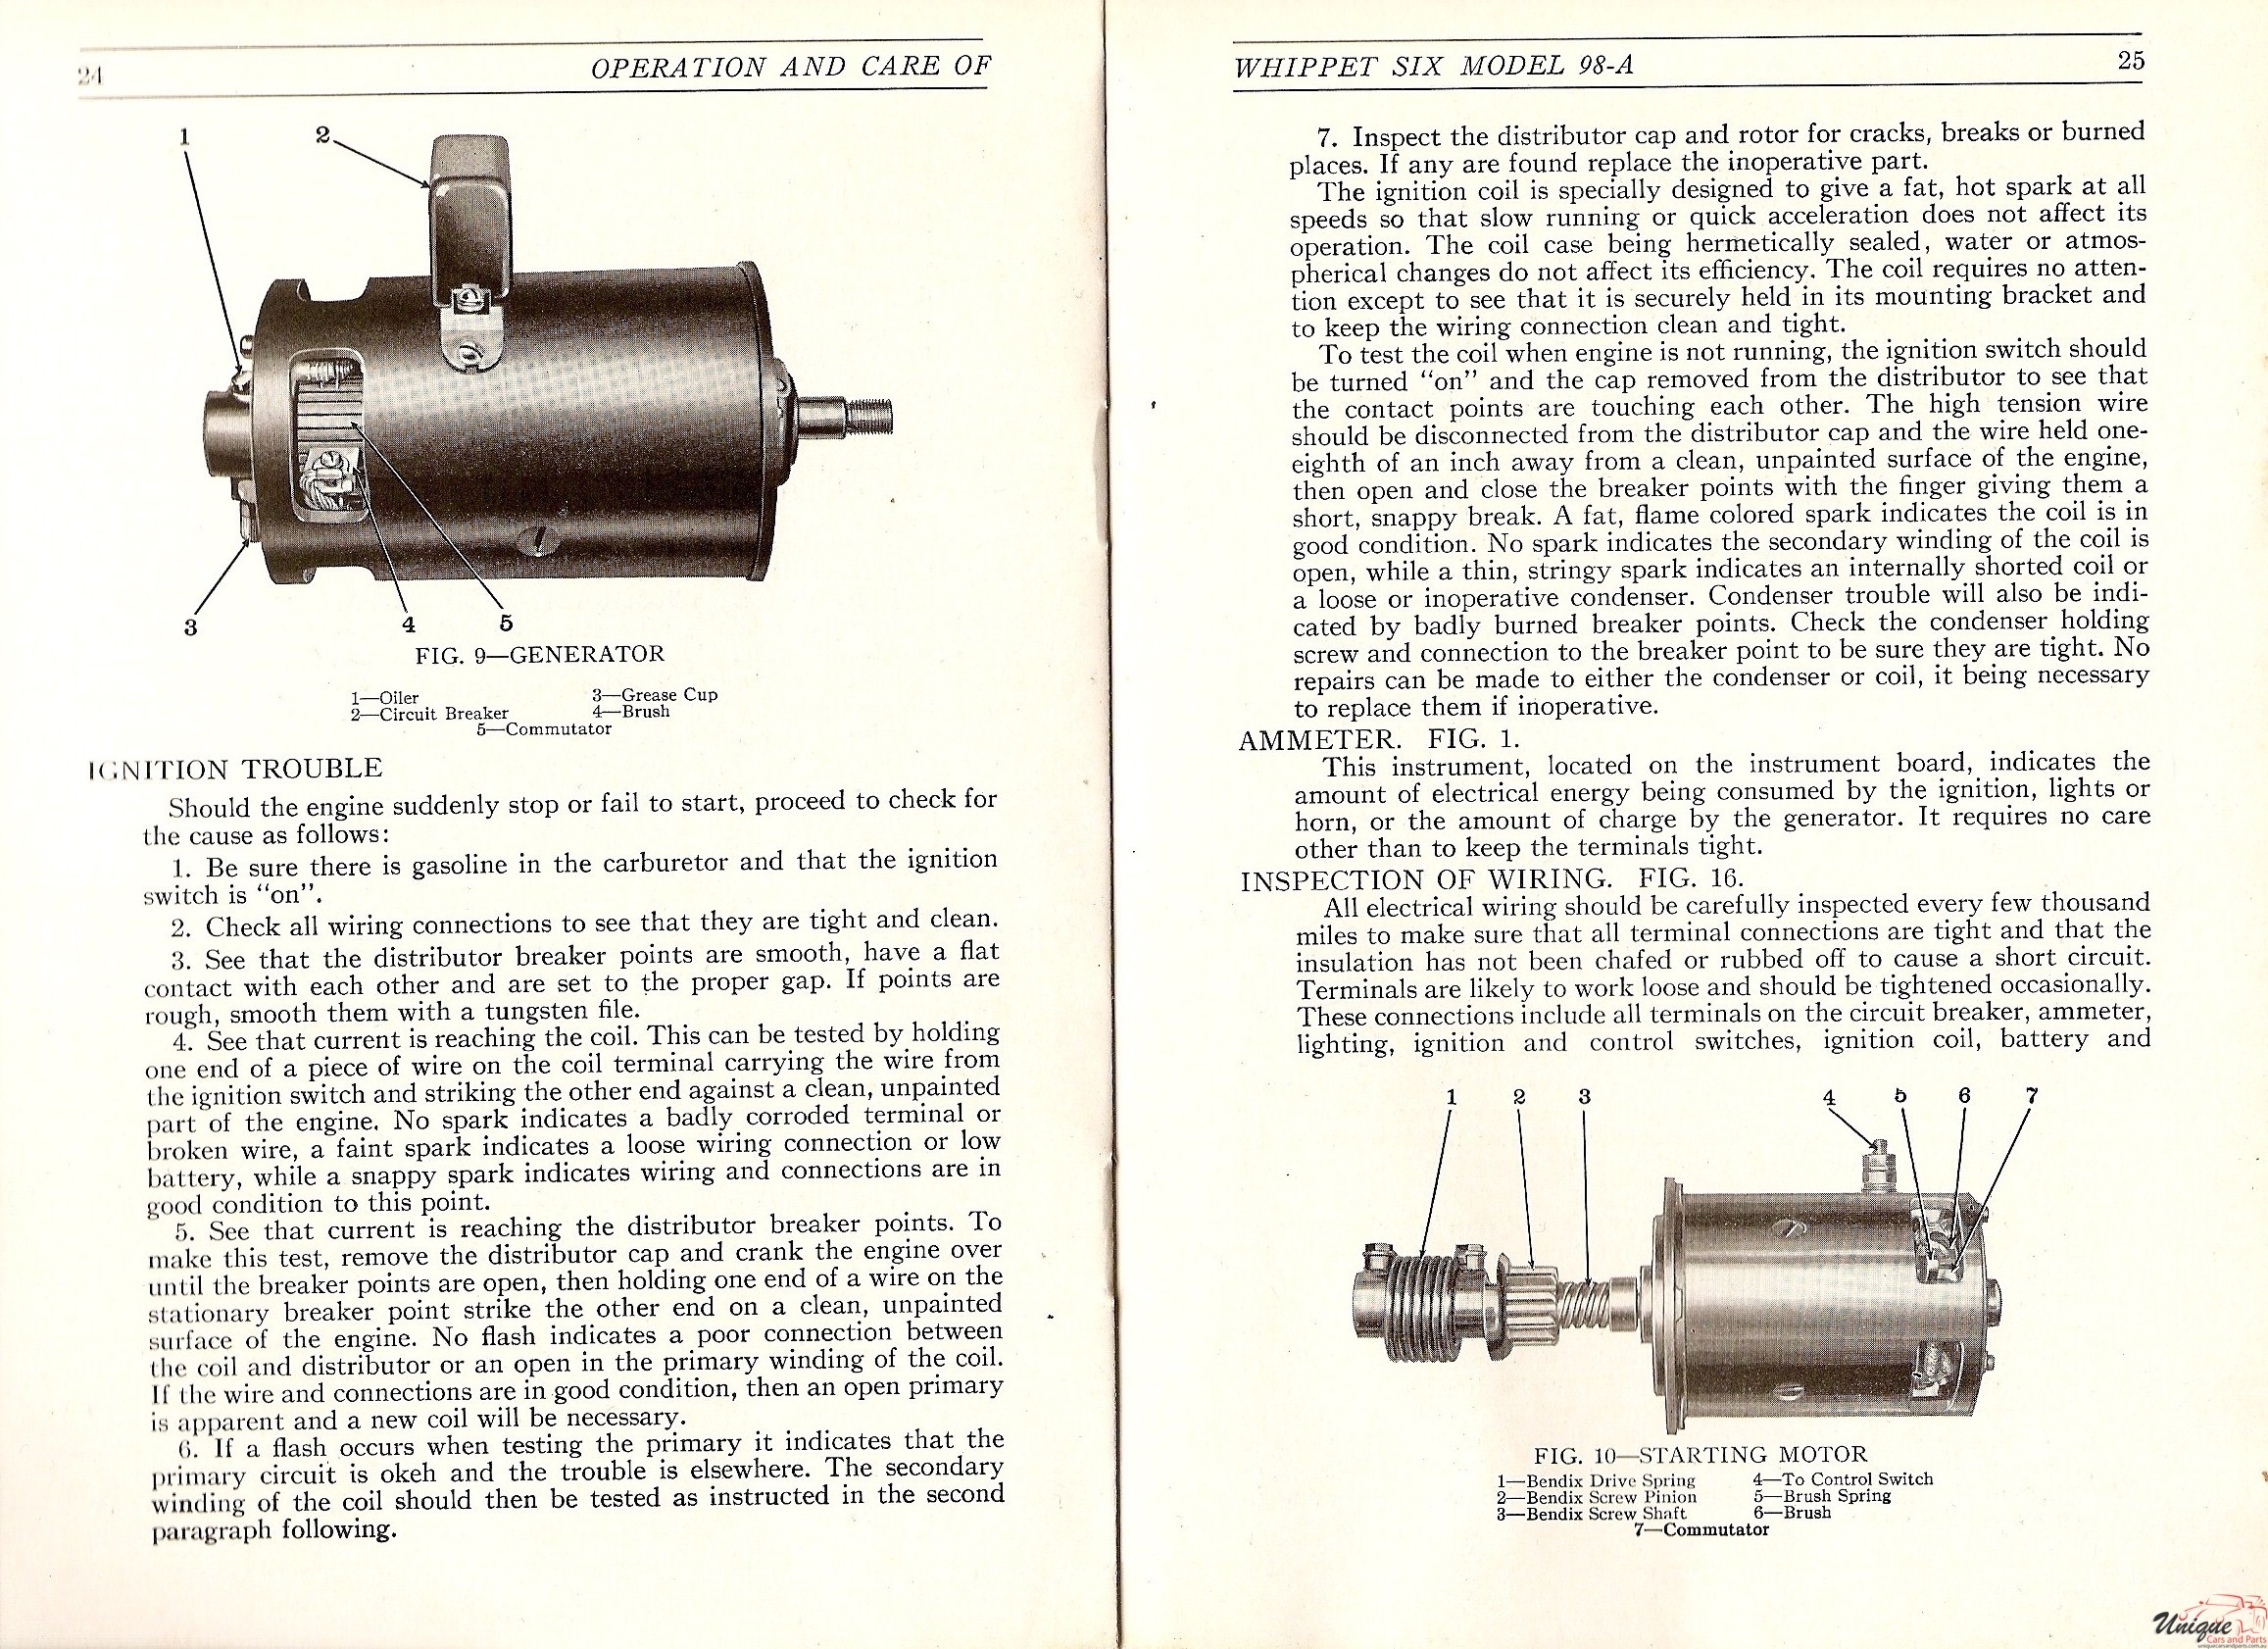 1929 Whippet Operator Manual Page 19